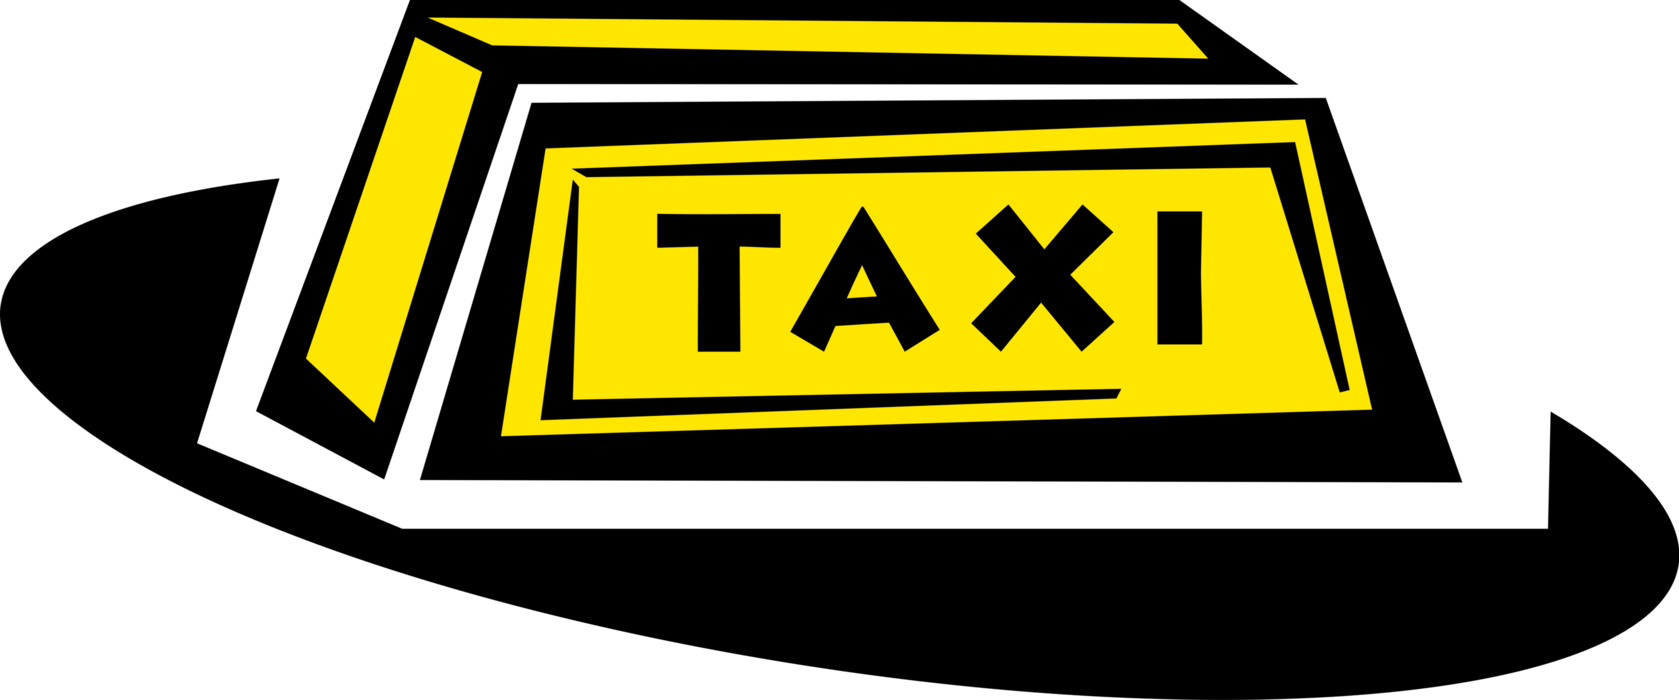 Vector Illustration of Taxicab Taxi or Cab Vehicle for Hire Automobile Motor Car Sign